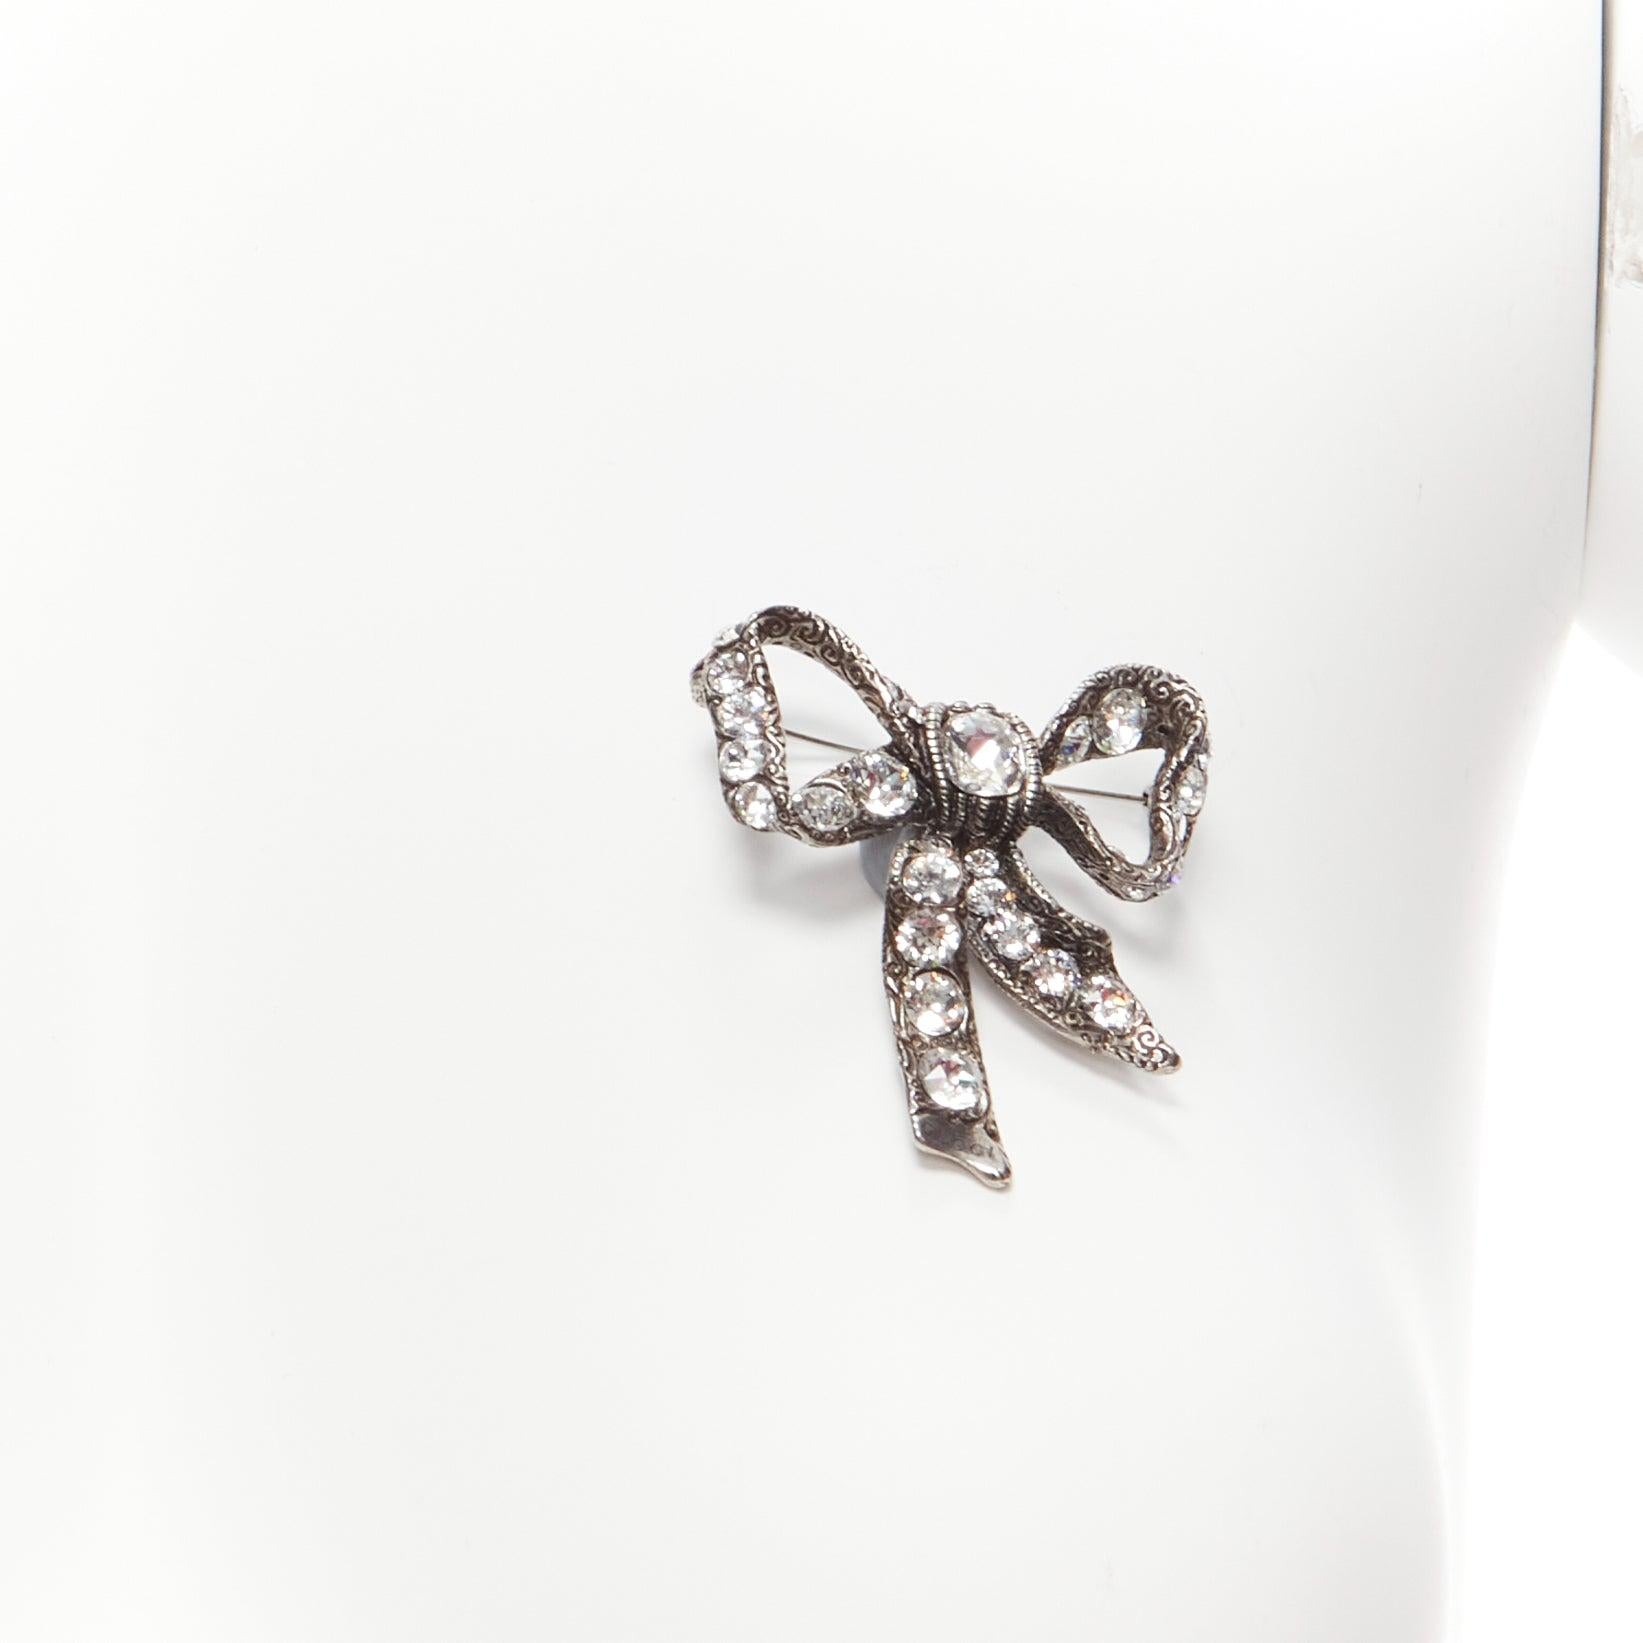 GUCCI Alessandro Michele clear crystal ribbon bow antique silver metal brooch
Reference: TGAS/D00531
Brand: Gucci
Designer: Alessandro Michele
Material: Metal
Color: Silver, Clear
Pattern: Solid
Closure: Pin
Extra Details: GUCCI logo on back